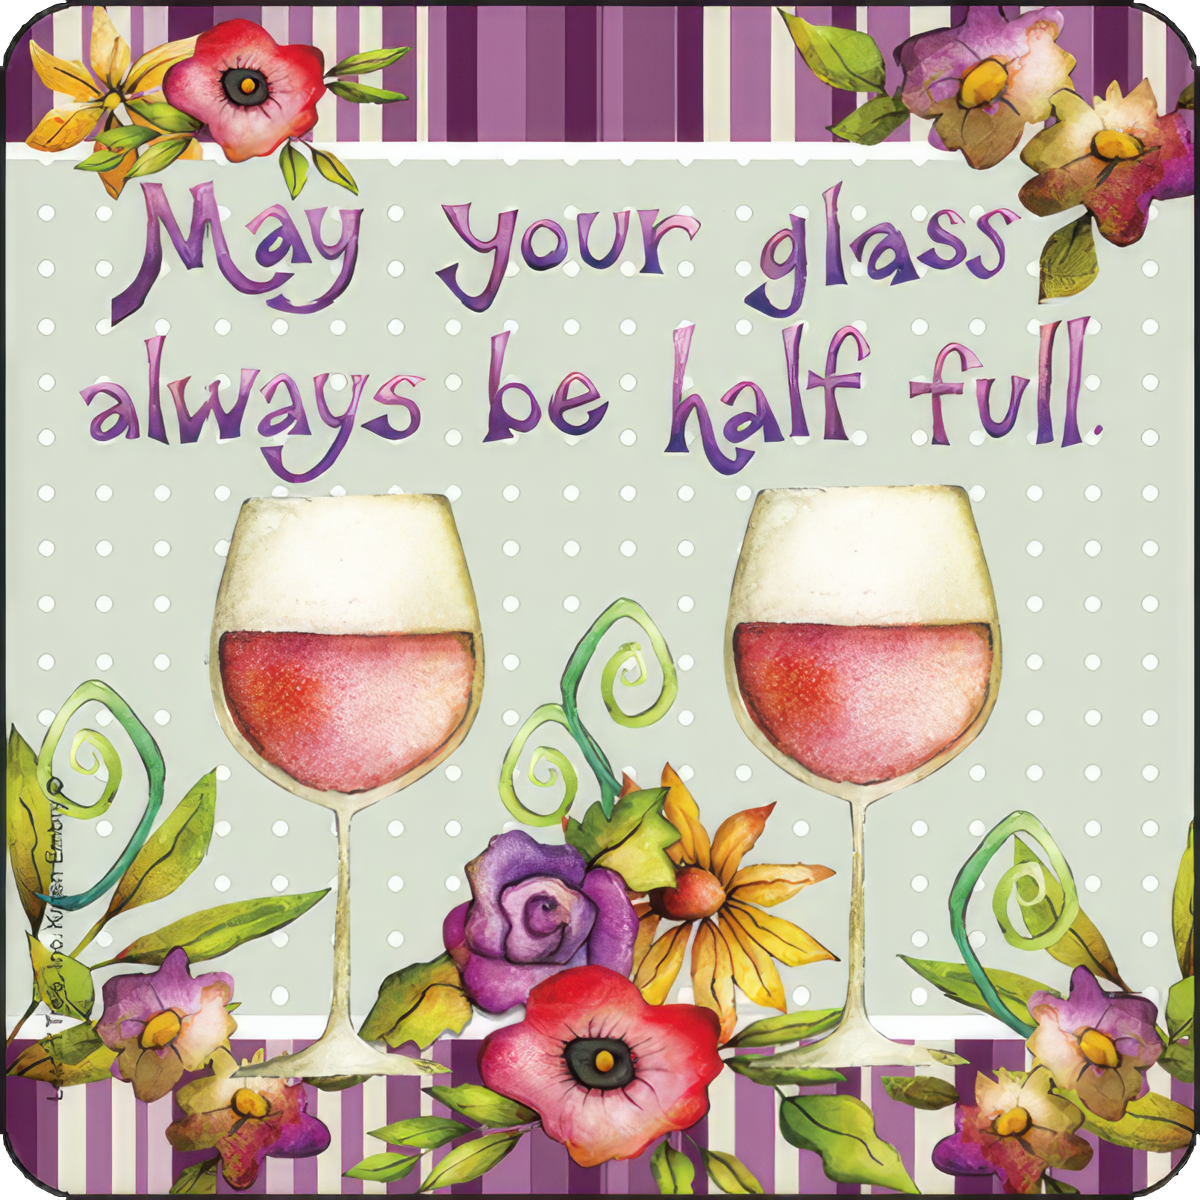 two half-full glasses of wine illustrate the saying 'may your glass always be half full'